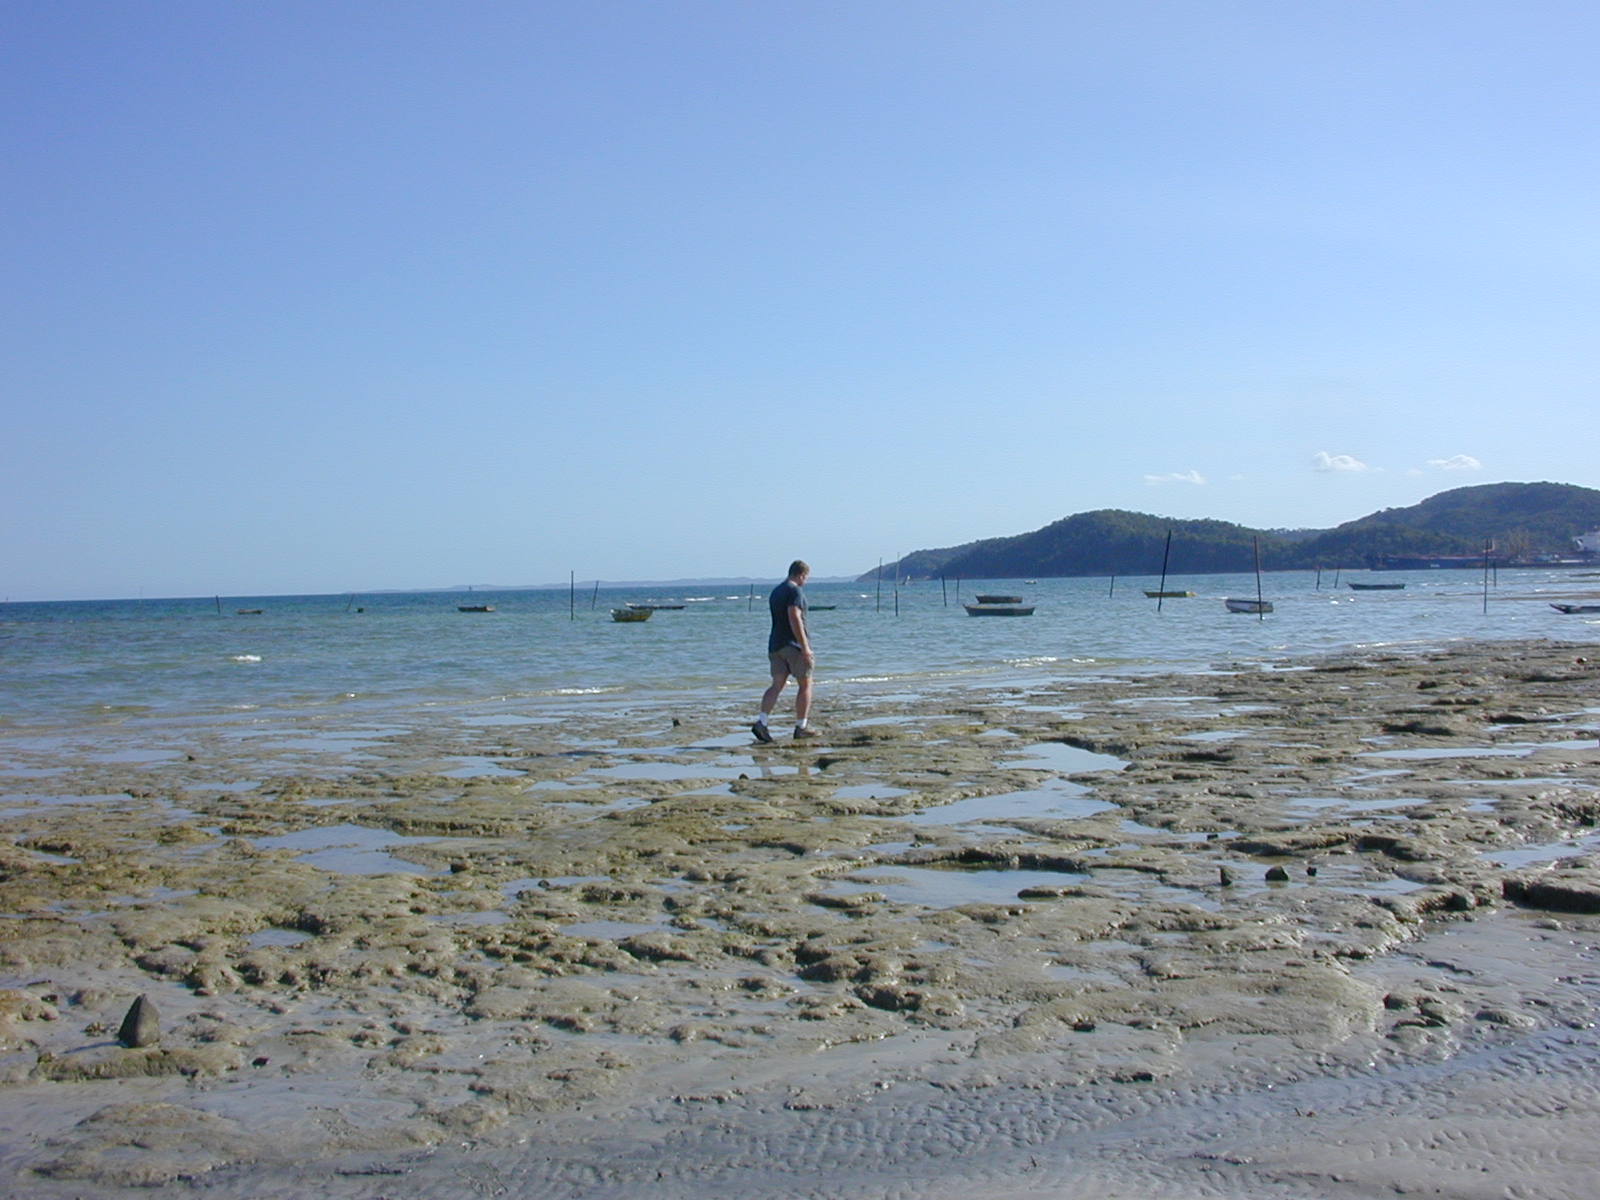 a man is walking across some shallow water